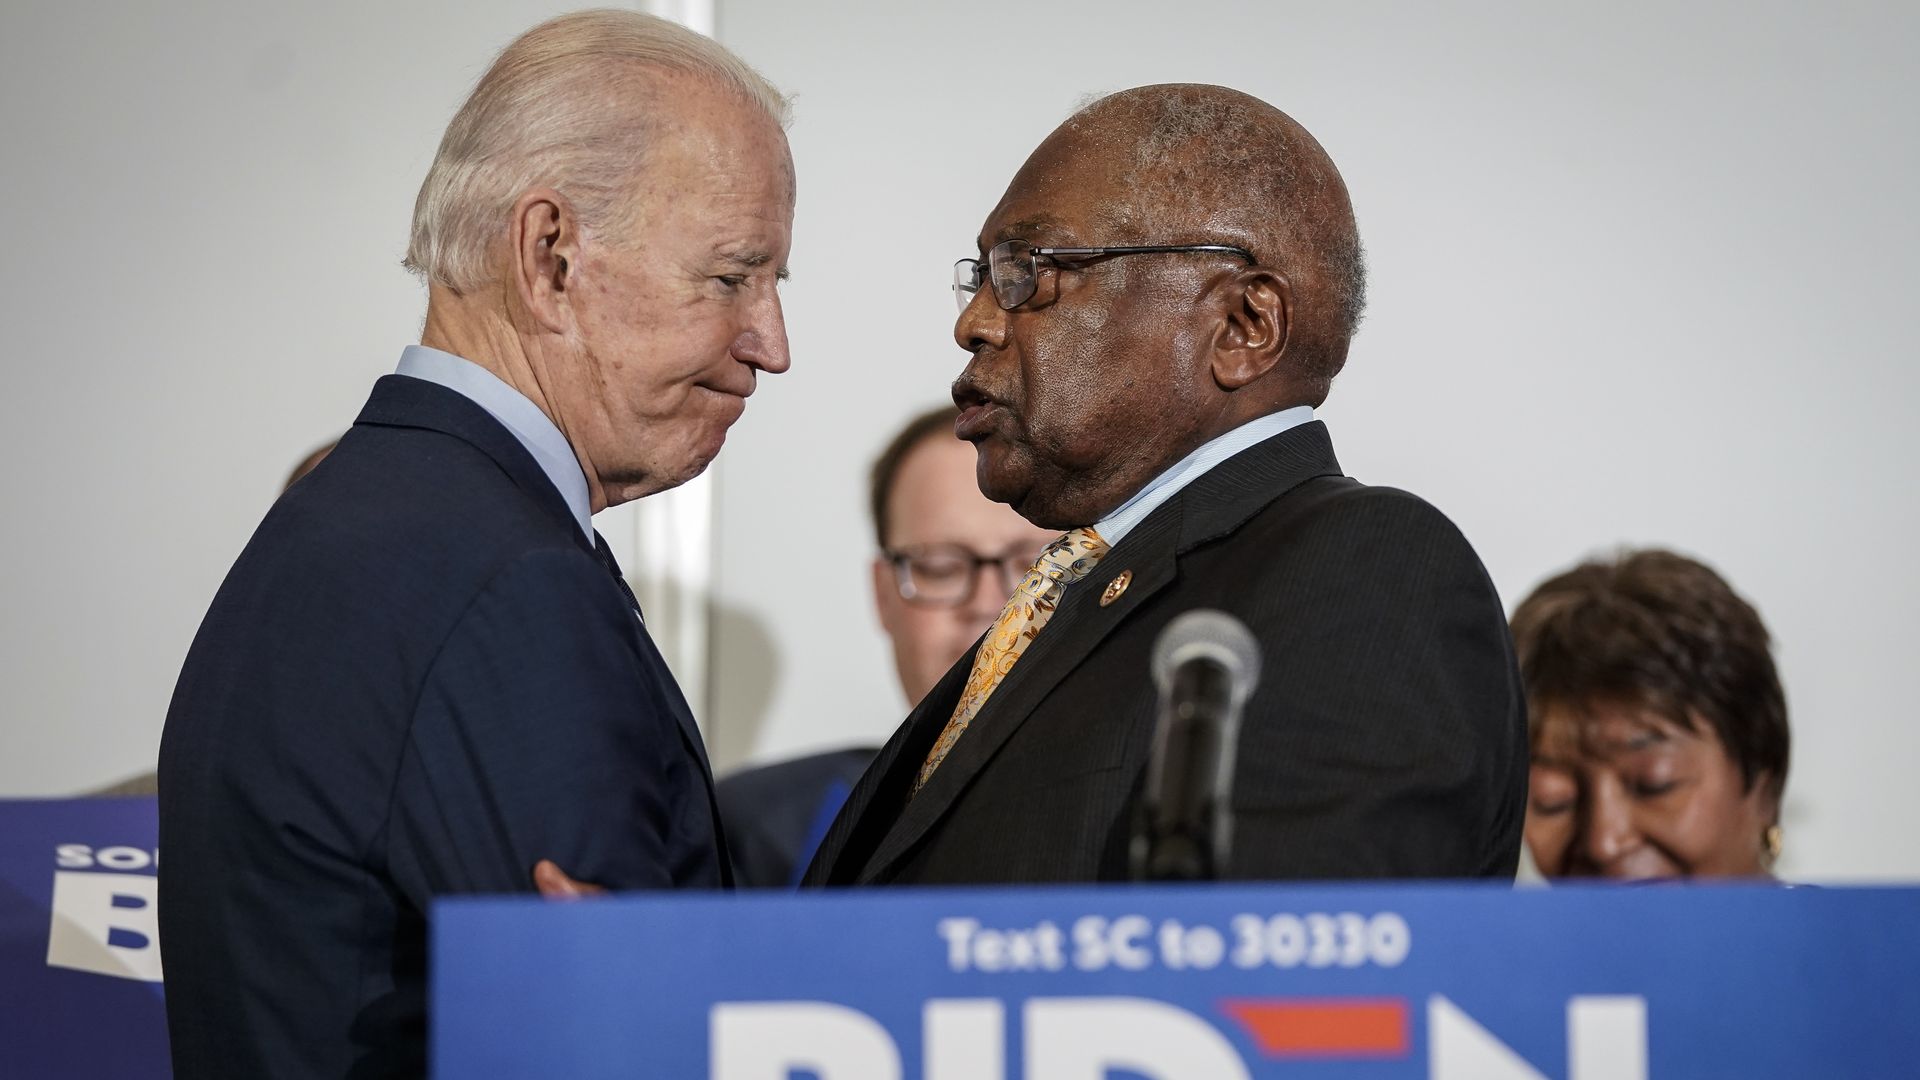 In this image, Biden and Clyburn hold each others' arms while standing in front of a campaign podium